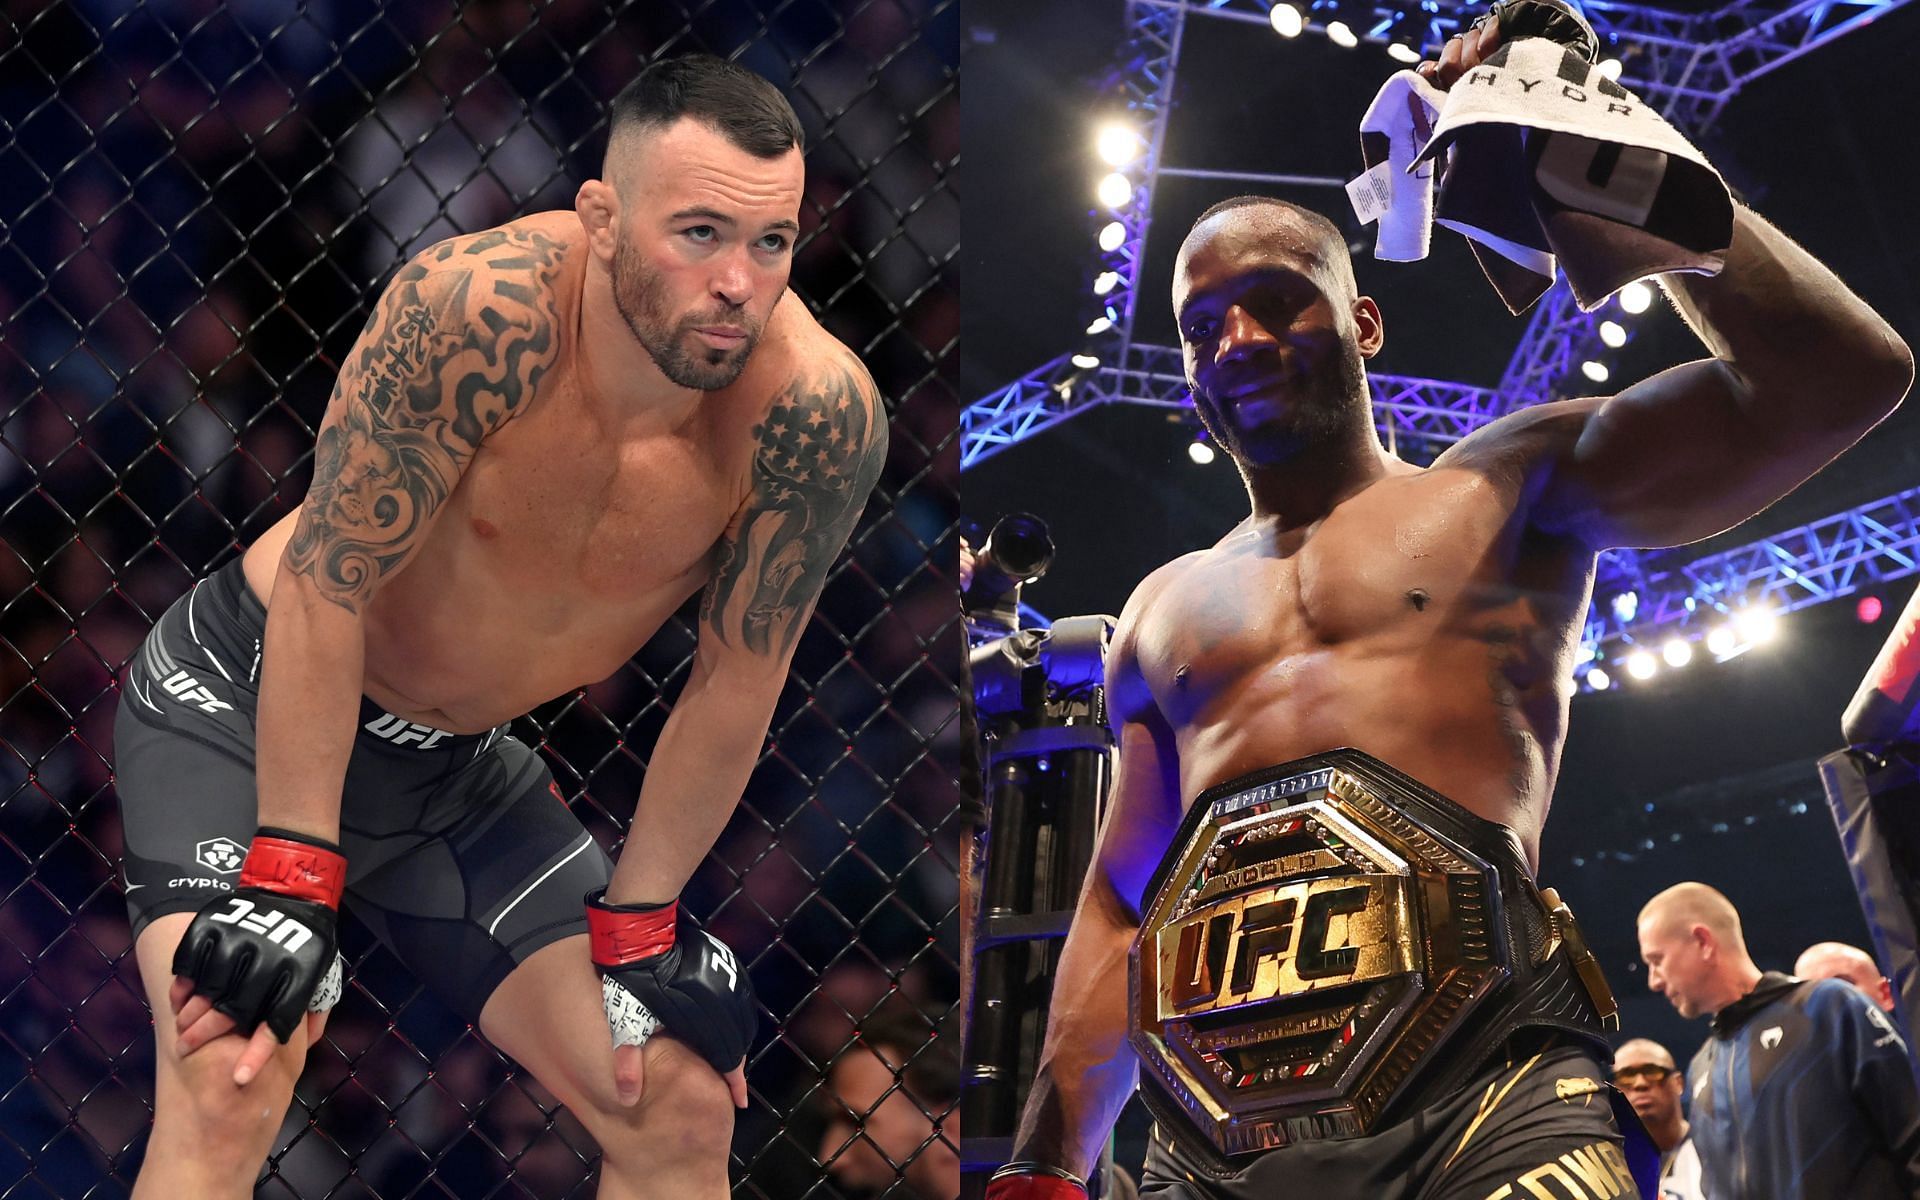 Colby Covington and Leon Edwards. [via Getty Images]